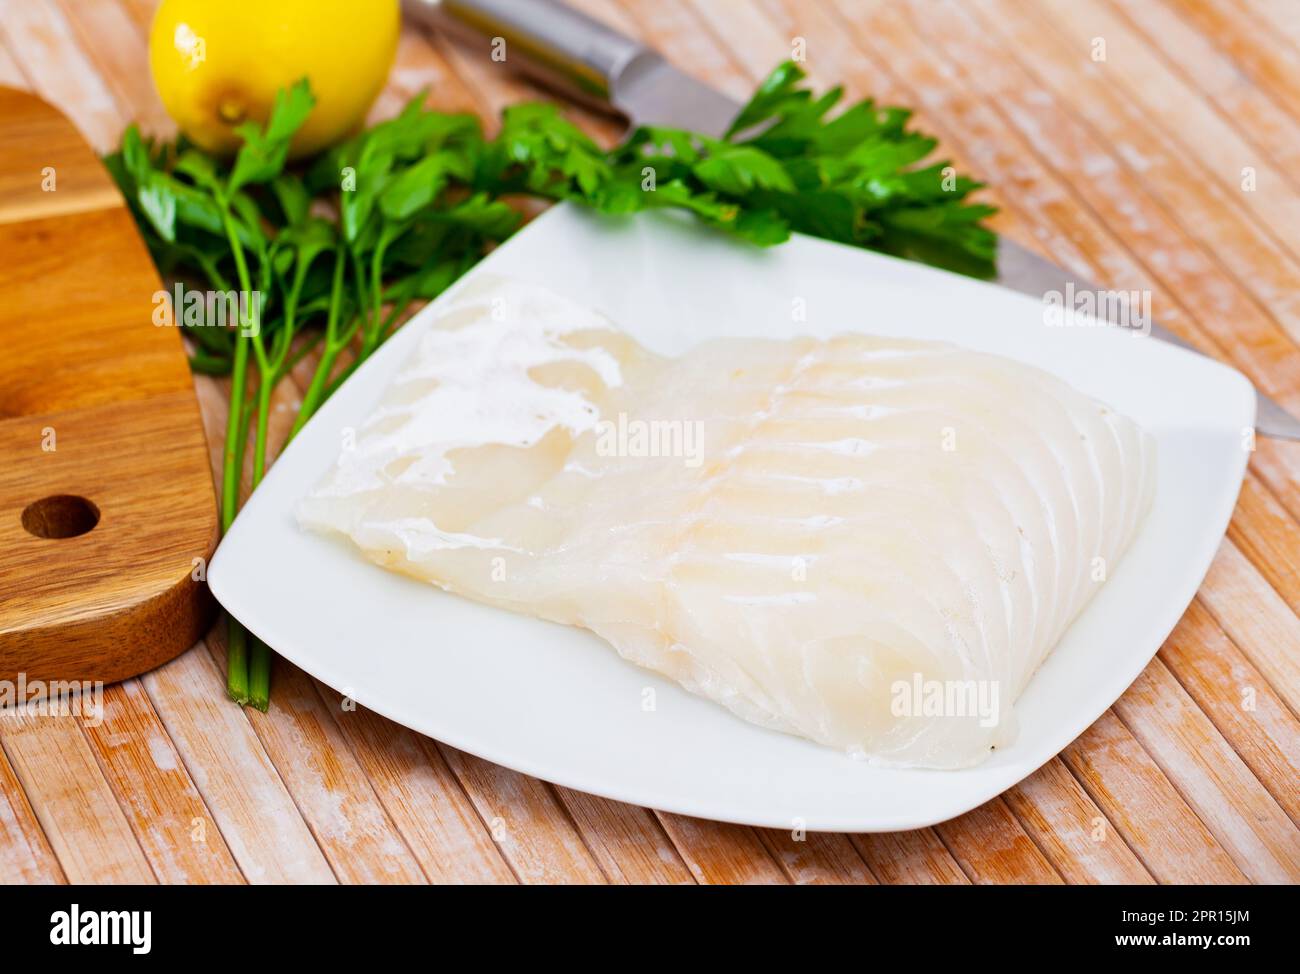 Fresh raw kingklip fillet with greens, lemon and spices Stock Photo